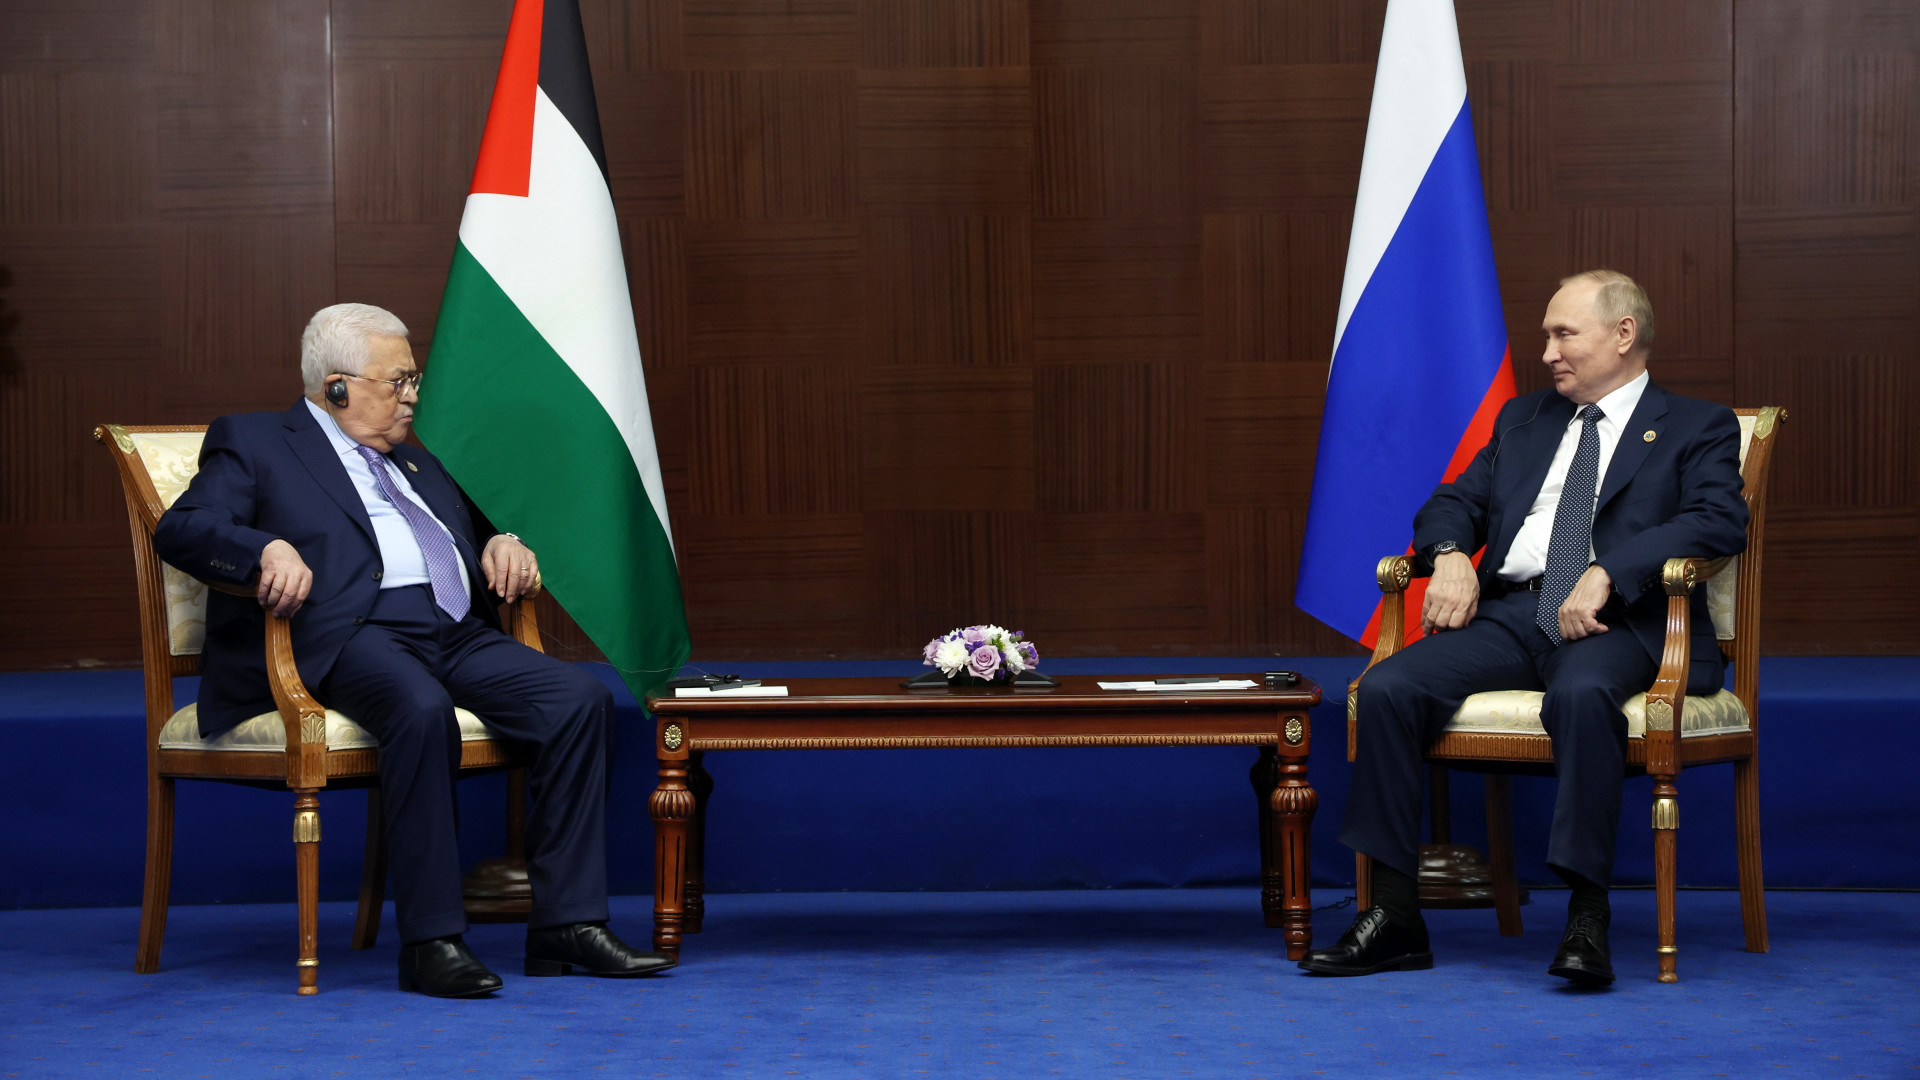 The Middle Eastern leader, who was angry with America, met with Putin